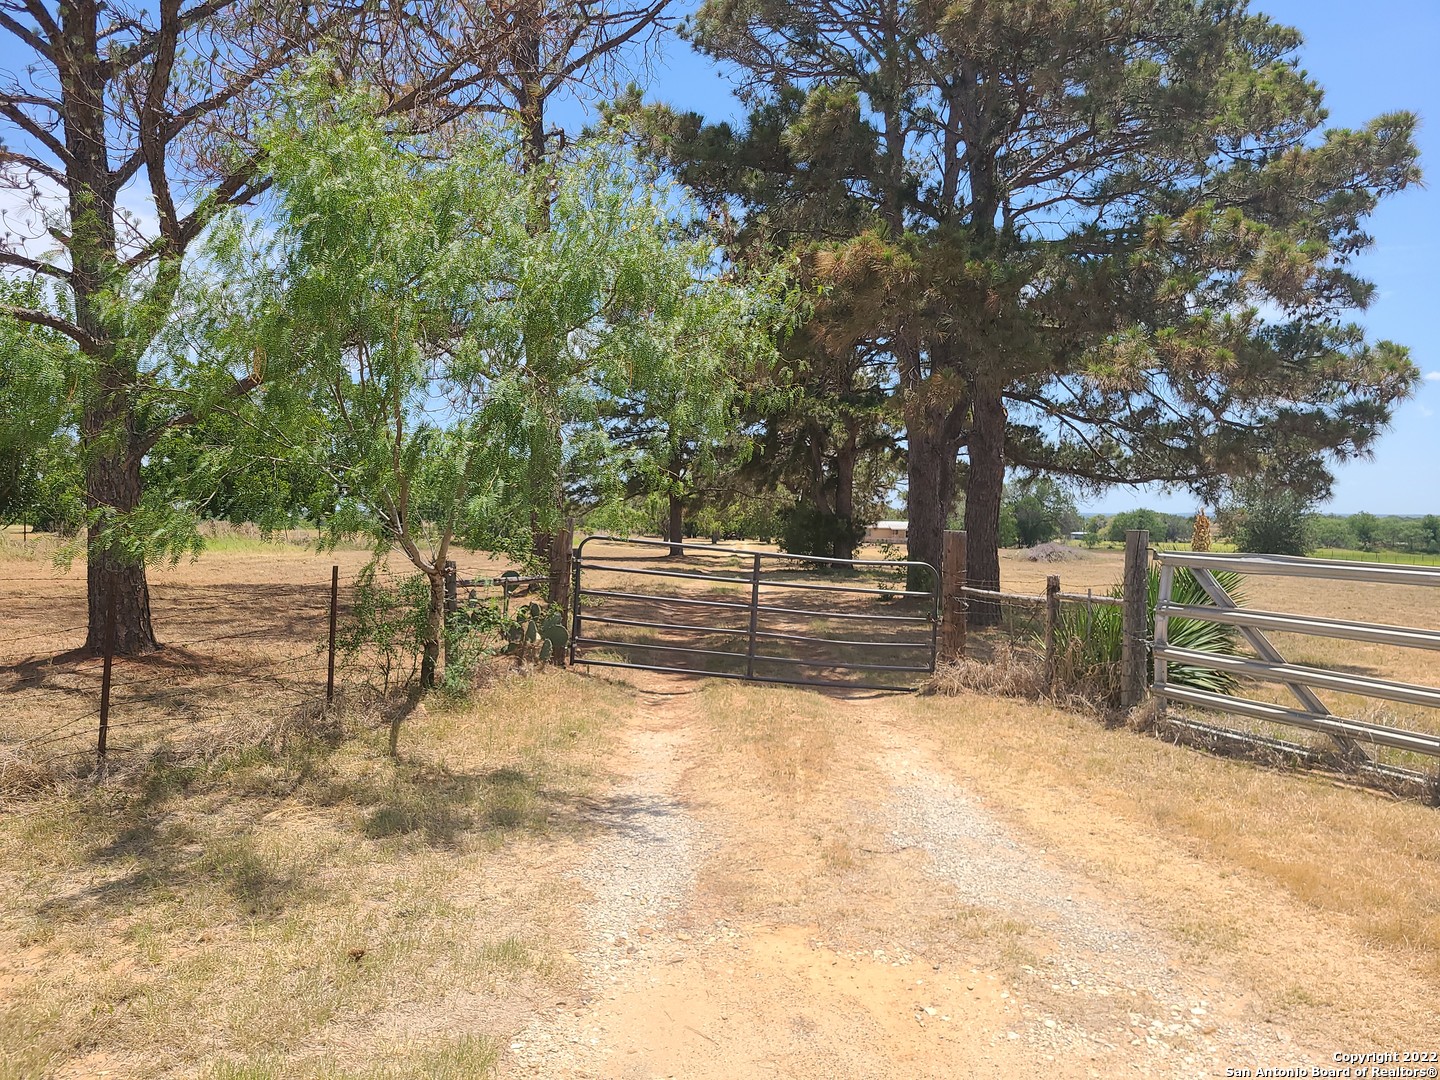 7 ACRES, only 2 miles out of La Vernia on FM 1346, nice pine trees line drive back to the home, this property is a diamond in the rough, HORSE FRIENDLY land, several fenced areas, investors welcome. Perfect location to build a forever home. New survey needed. Property sold AS-IS.